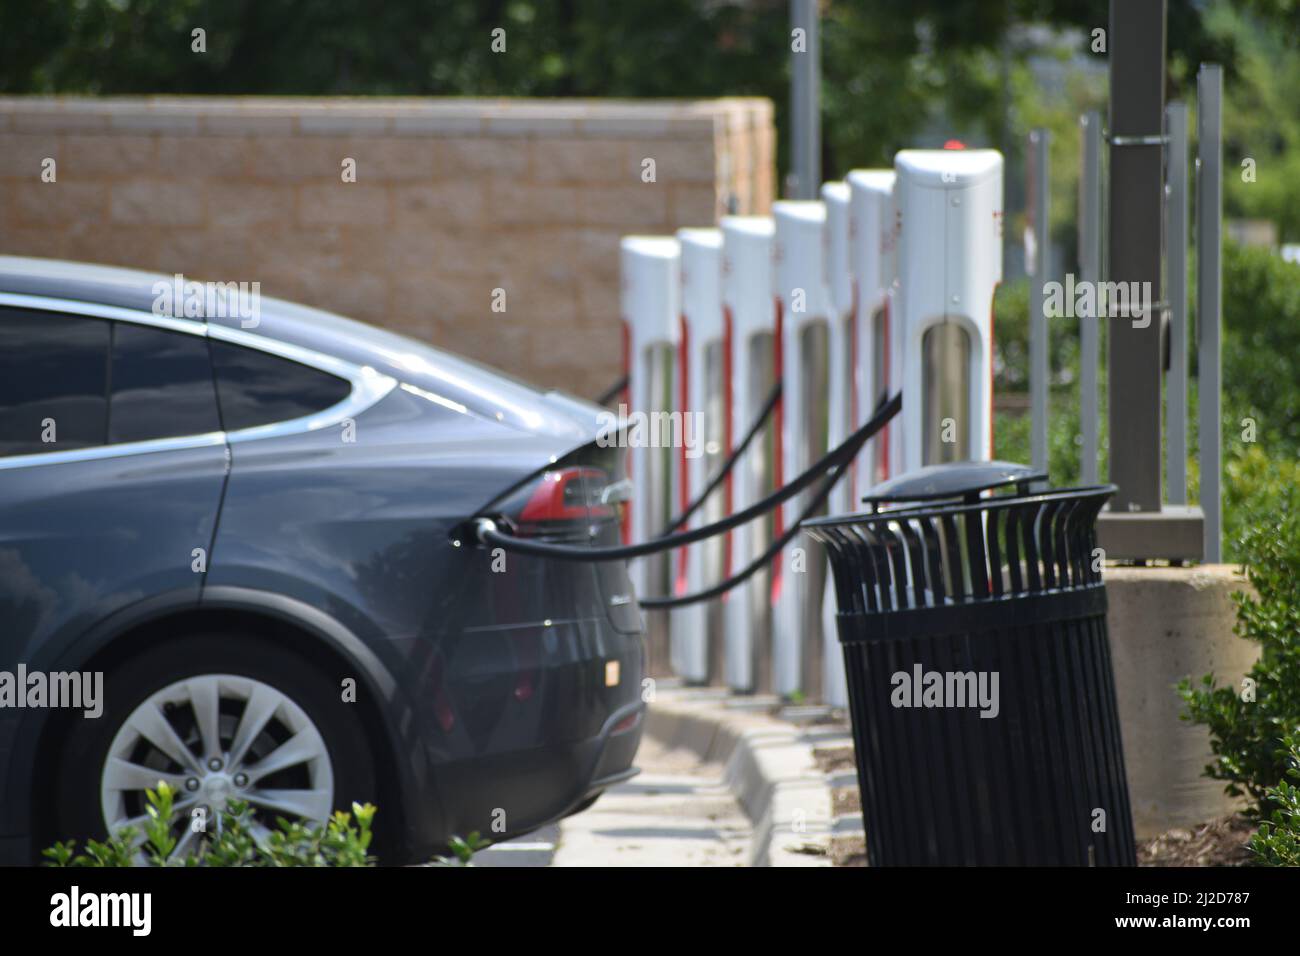 Tesla vehicles being charged at a Tesla charging station in Southlake Texas - July 2021 Stock Photo